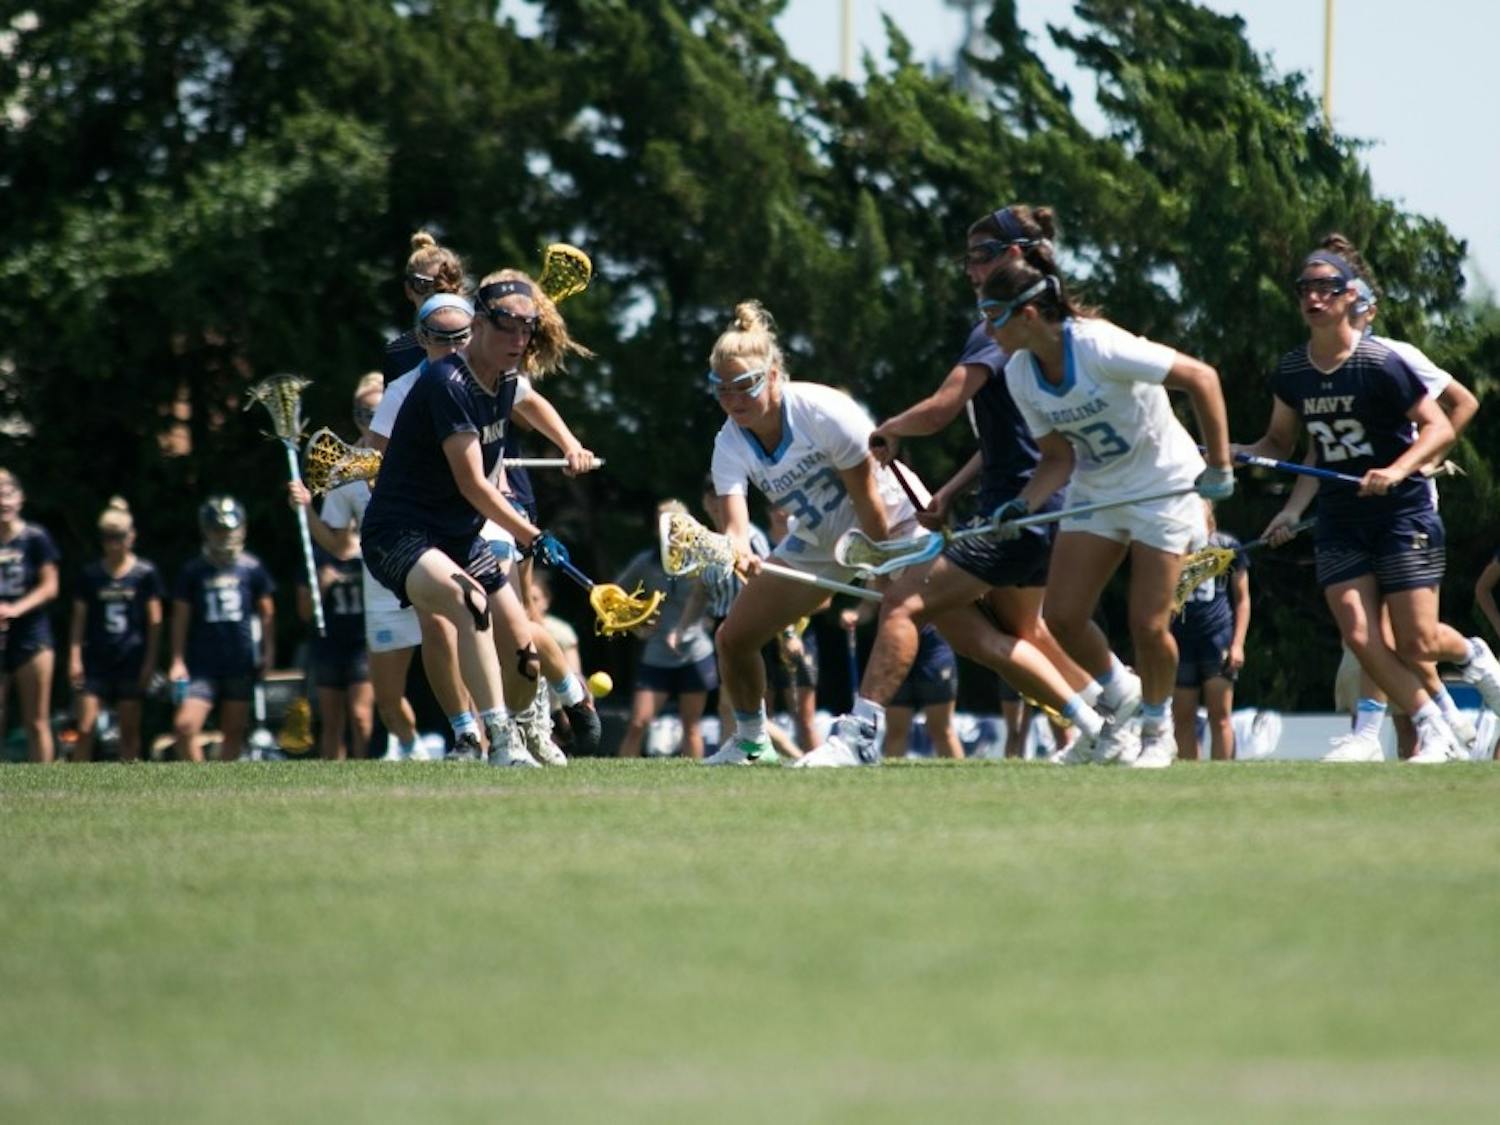 North Carolina and Navy players fight for the ball during a NCAA quarterfinal match on May 20, 2017, at Fetzer Field.